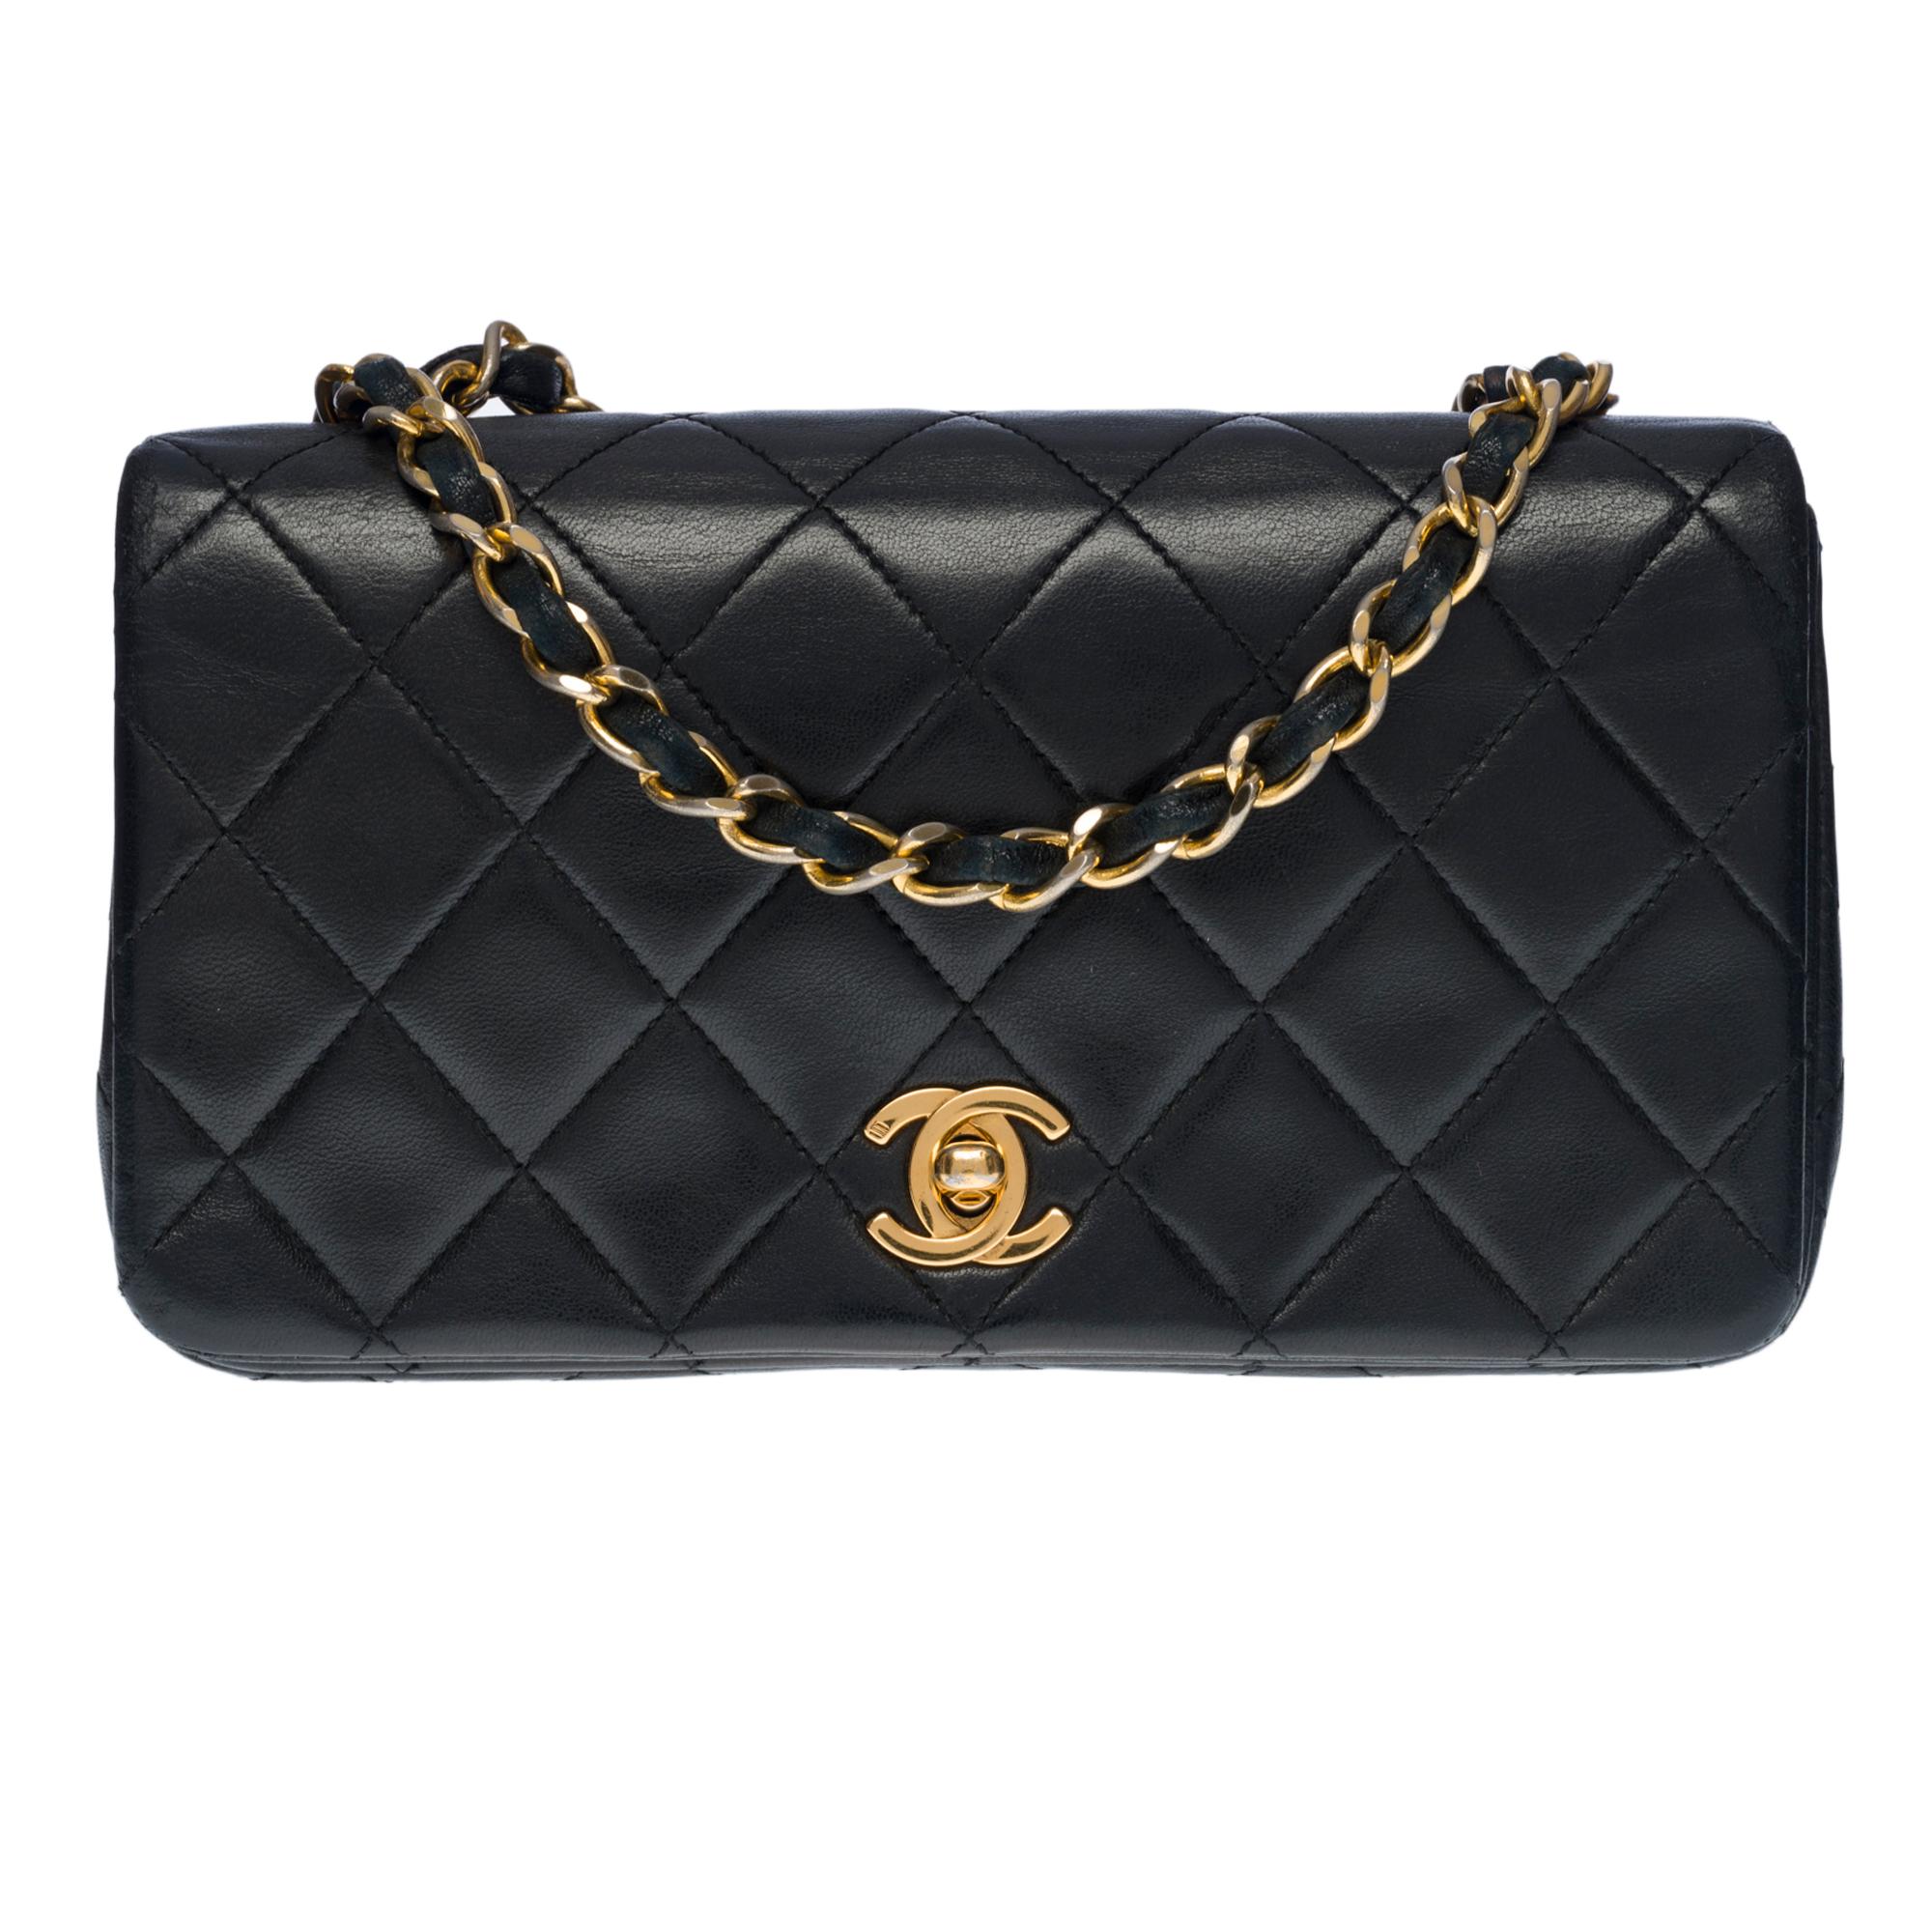 Charming Chanel Classic Mini Full Flap shoulder bag in black quilted lambskin, gold-tone metal hardware, a gold-tone metal chain handle interwoven with black leather for a shoulder carry

Flap closure, gold-tone CC clasp
Burgundy leather interior, 1